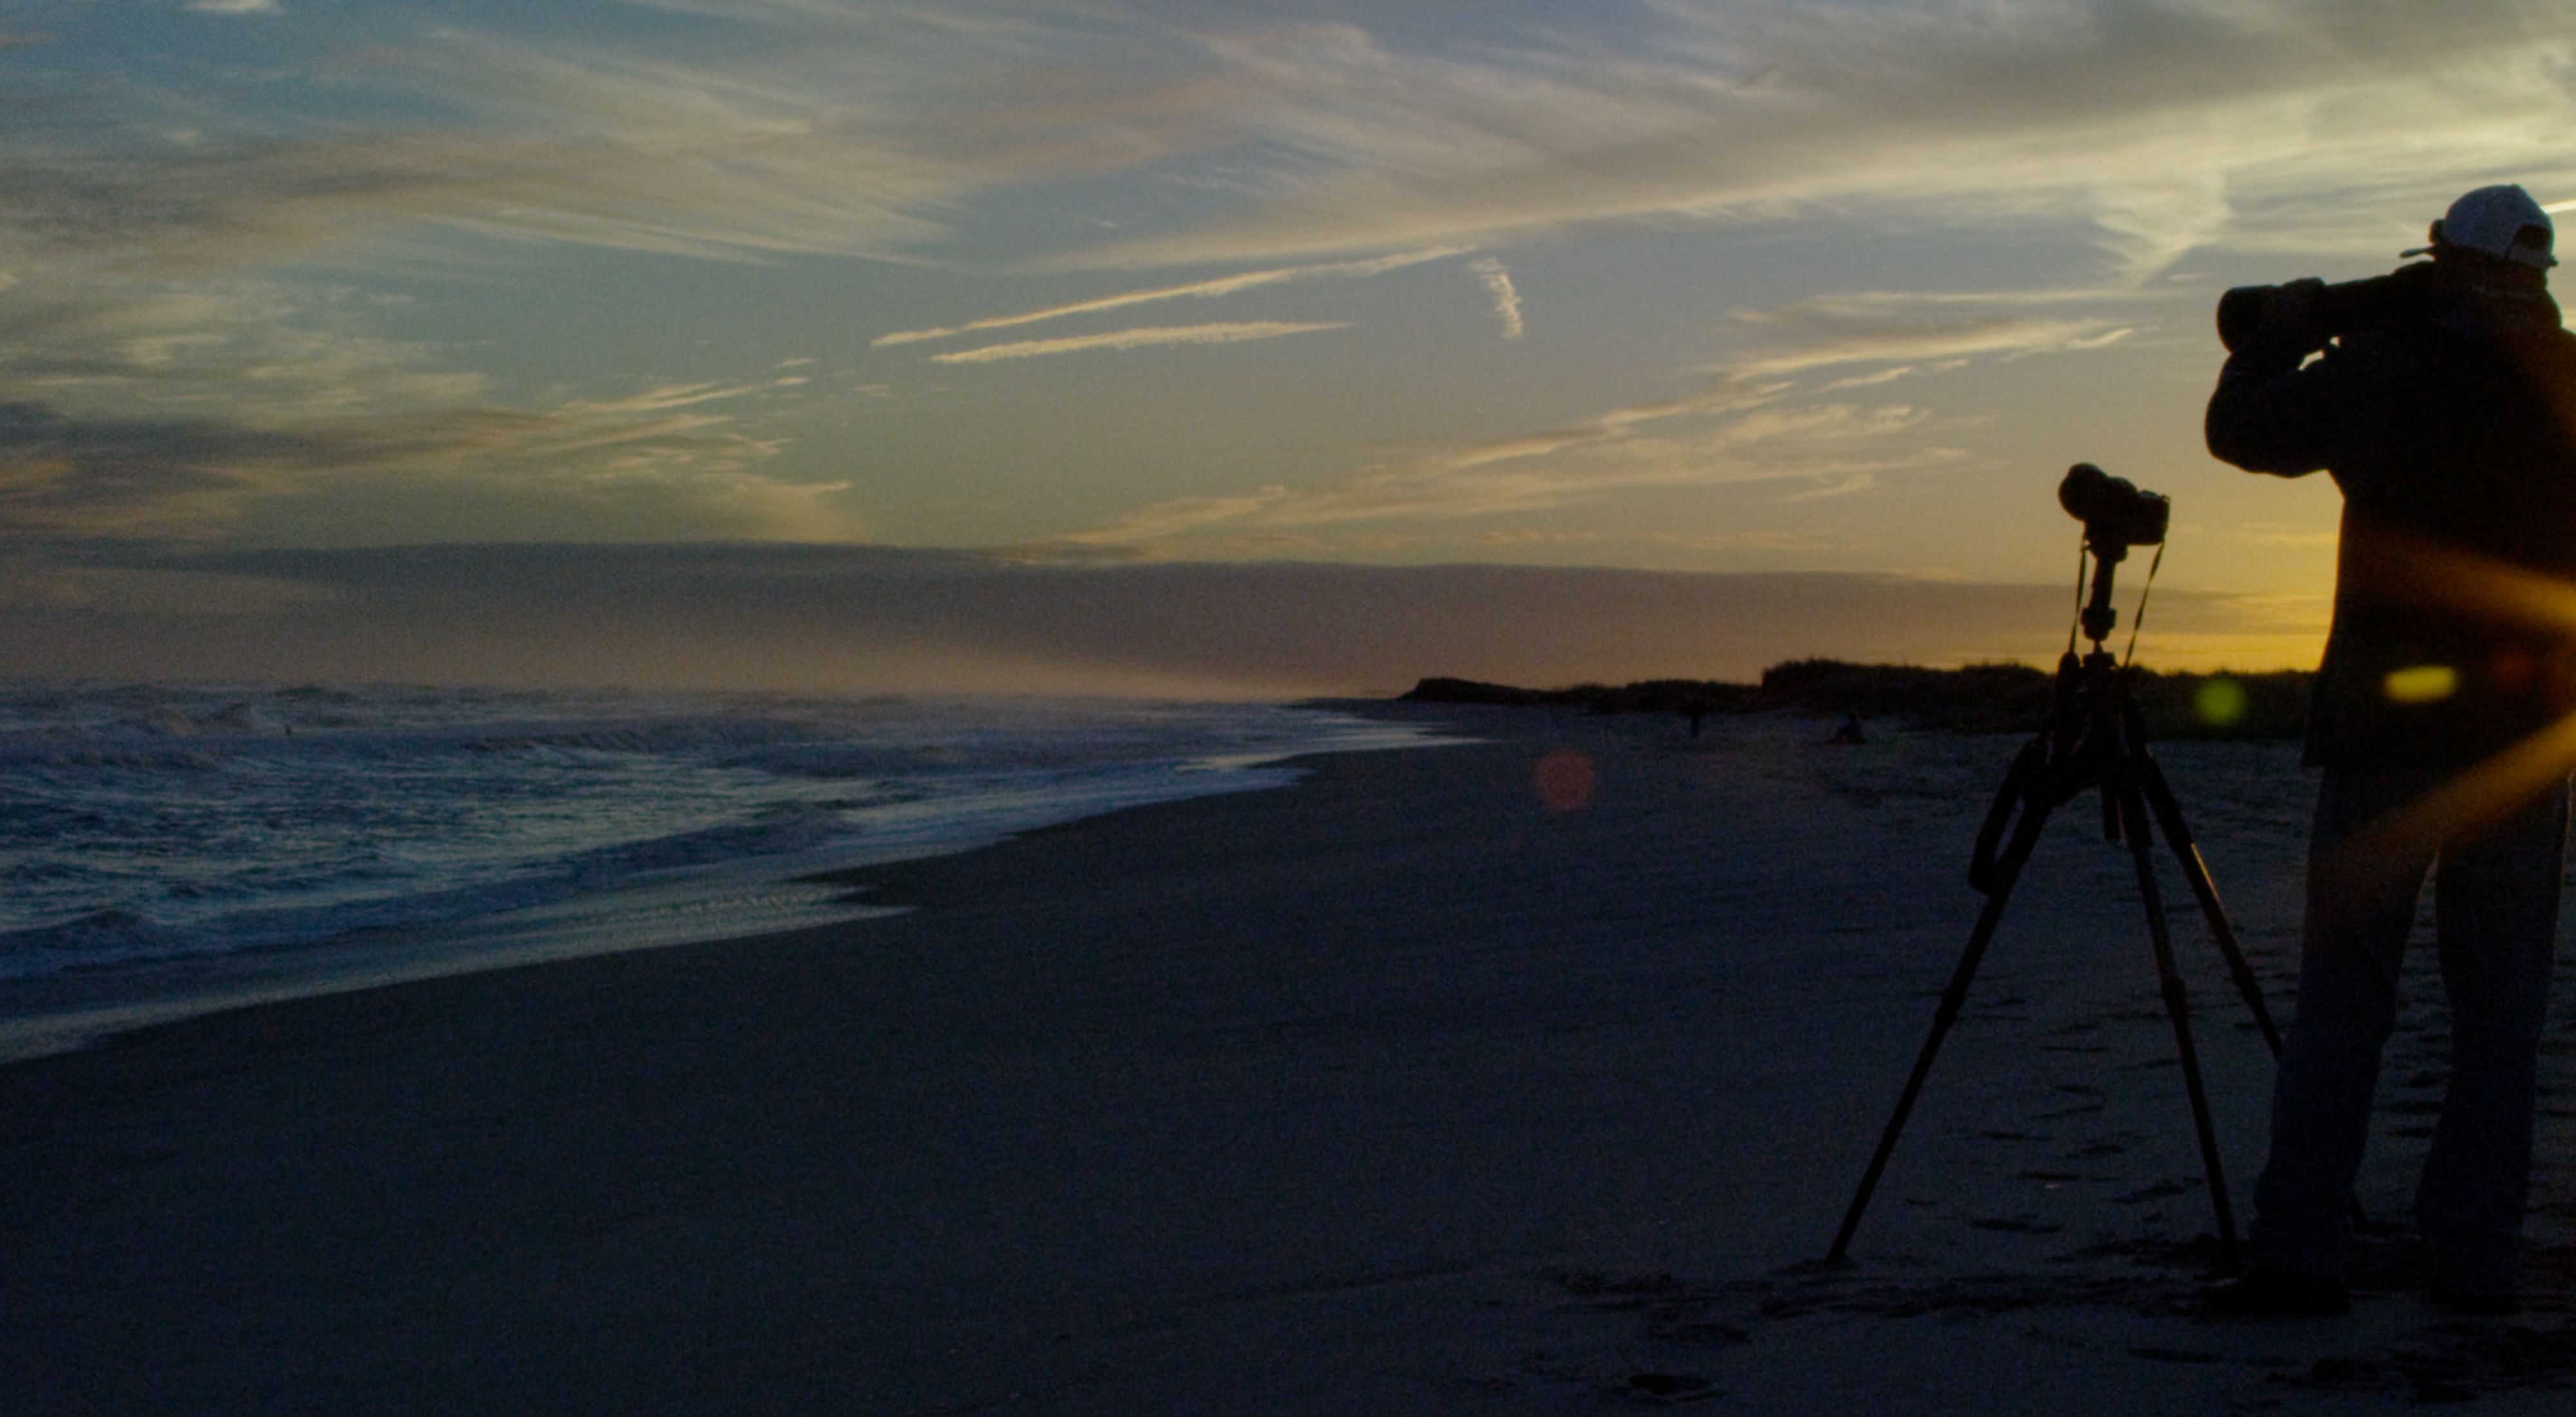 Mike Busch purchased his first digital single lens reflex camera in 2012 just prior to Superstorm Sandy.